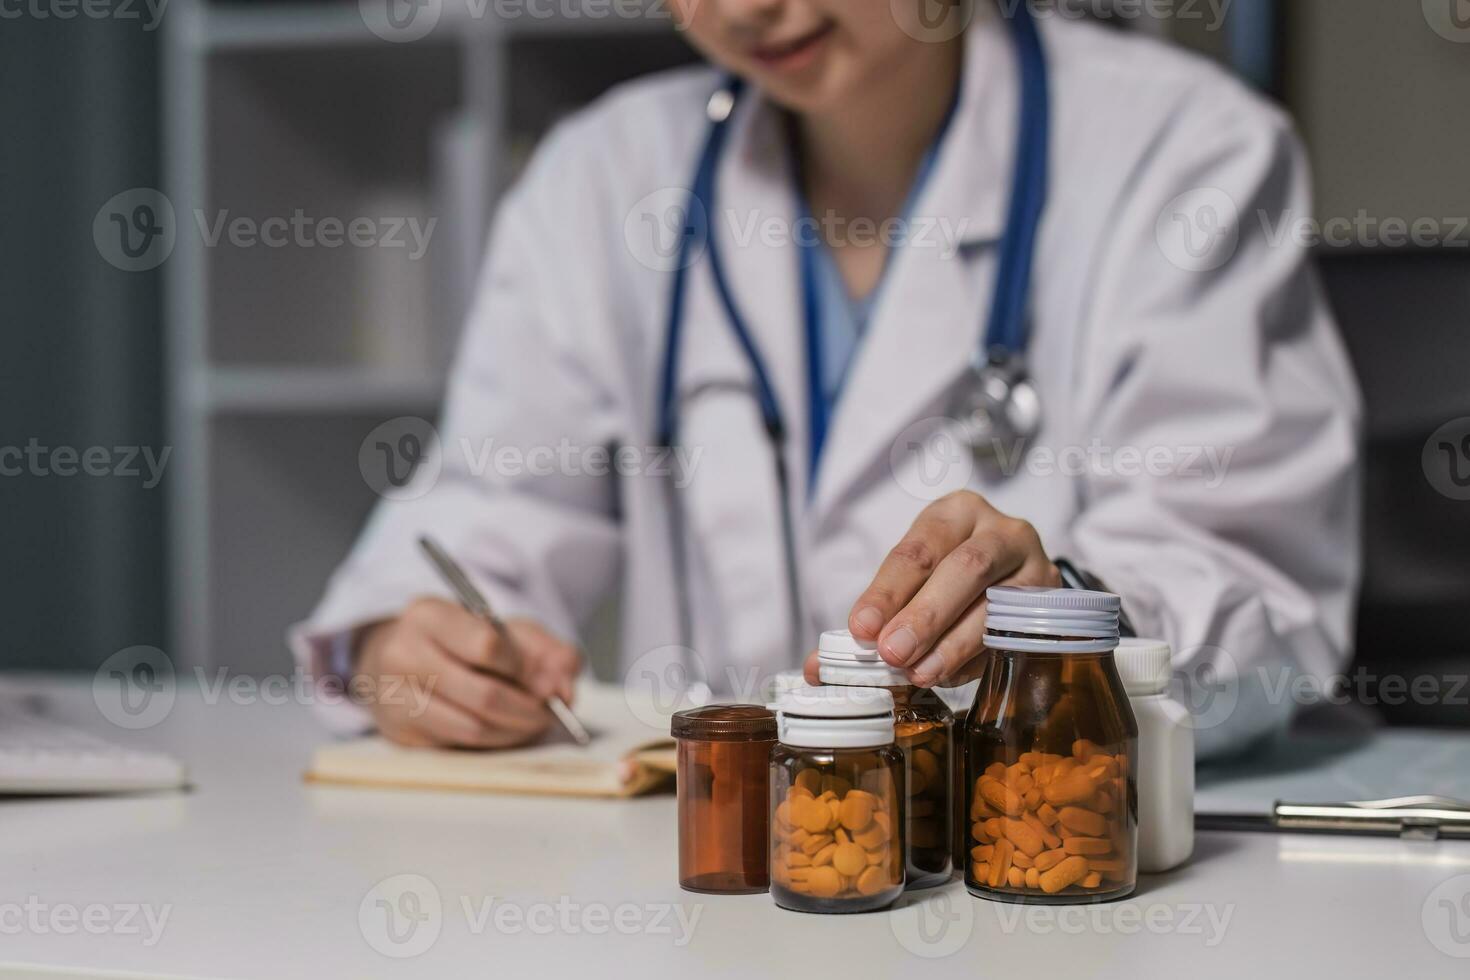 Asian female medic doctor gp therapist wear white coat holding pills bottle in hand writing medical prescription sitting at work desk prescribing pharmacy medicine concept. Closeup view photo